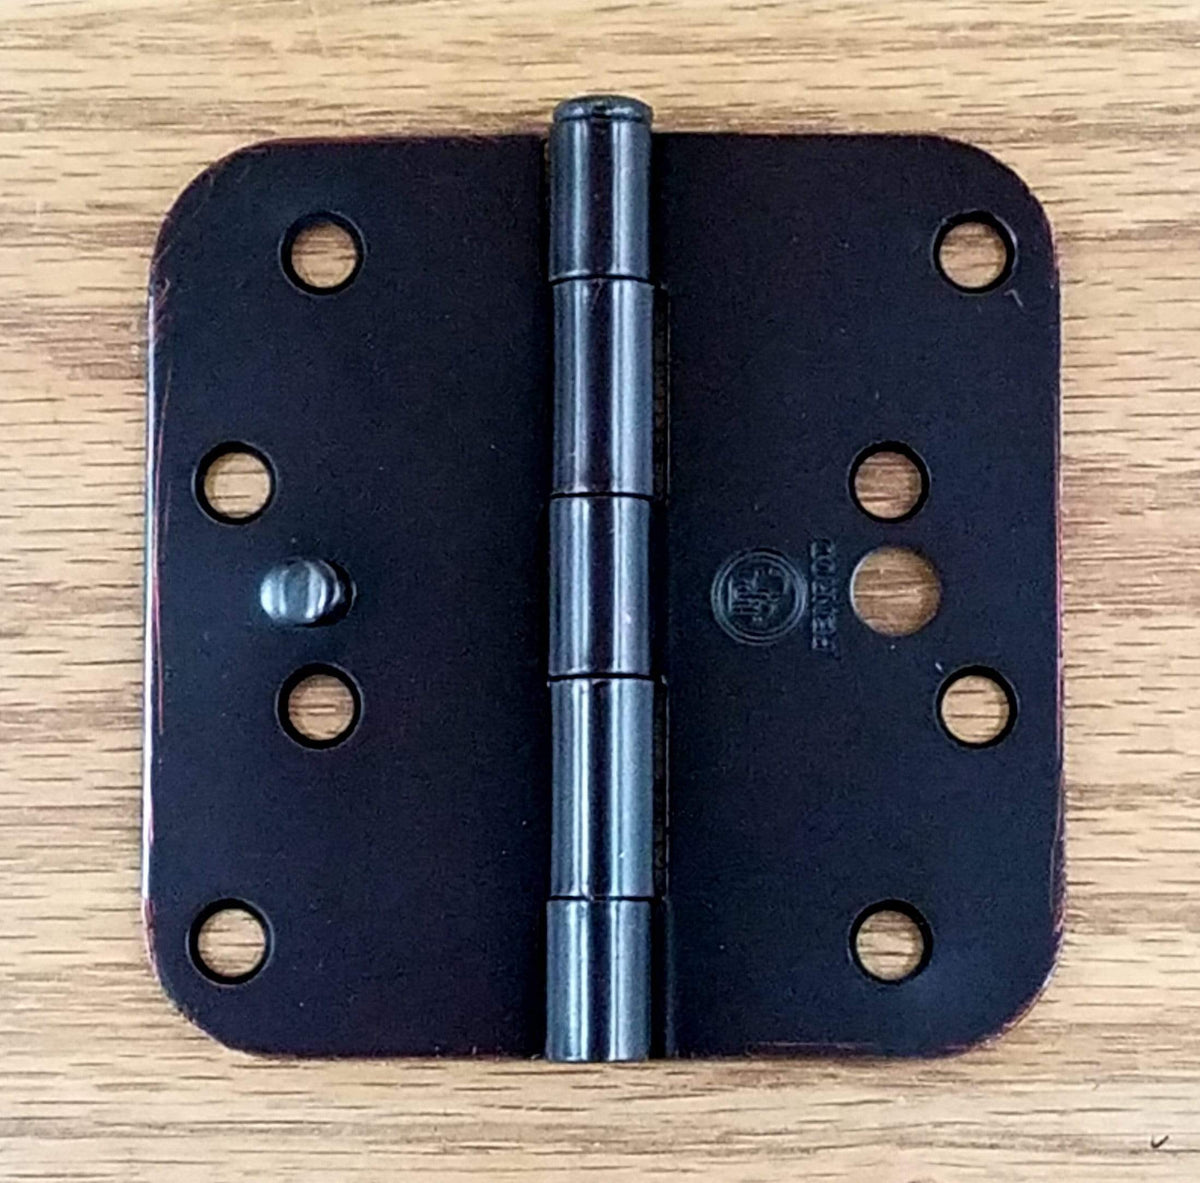 Oil Rubbed Bronze Hinges With Security Tab - 4" Inch With 5/8" Inch Radius Corners - 3 Pack